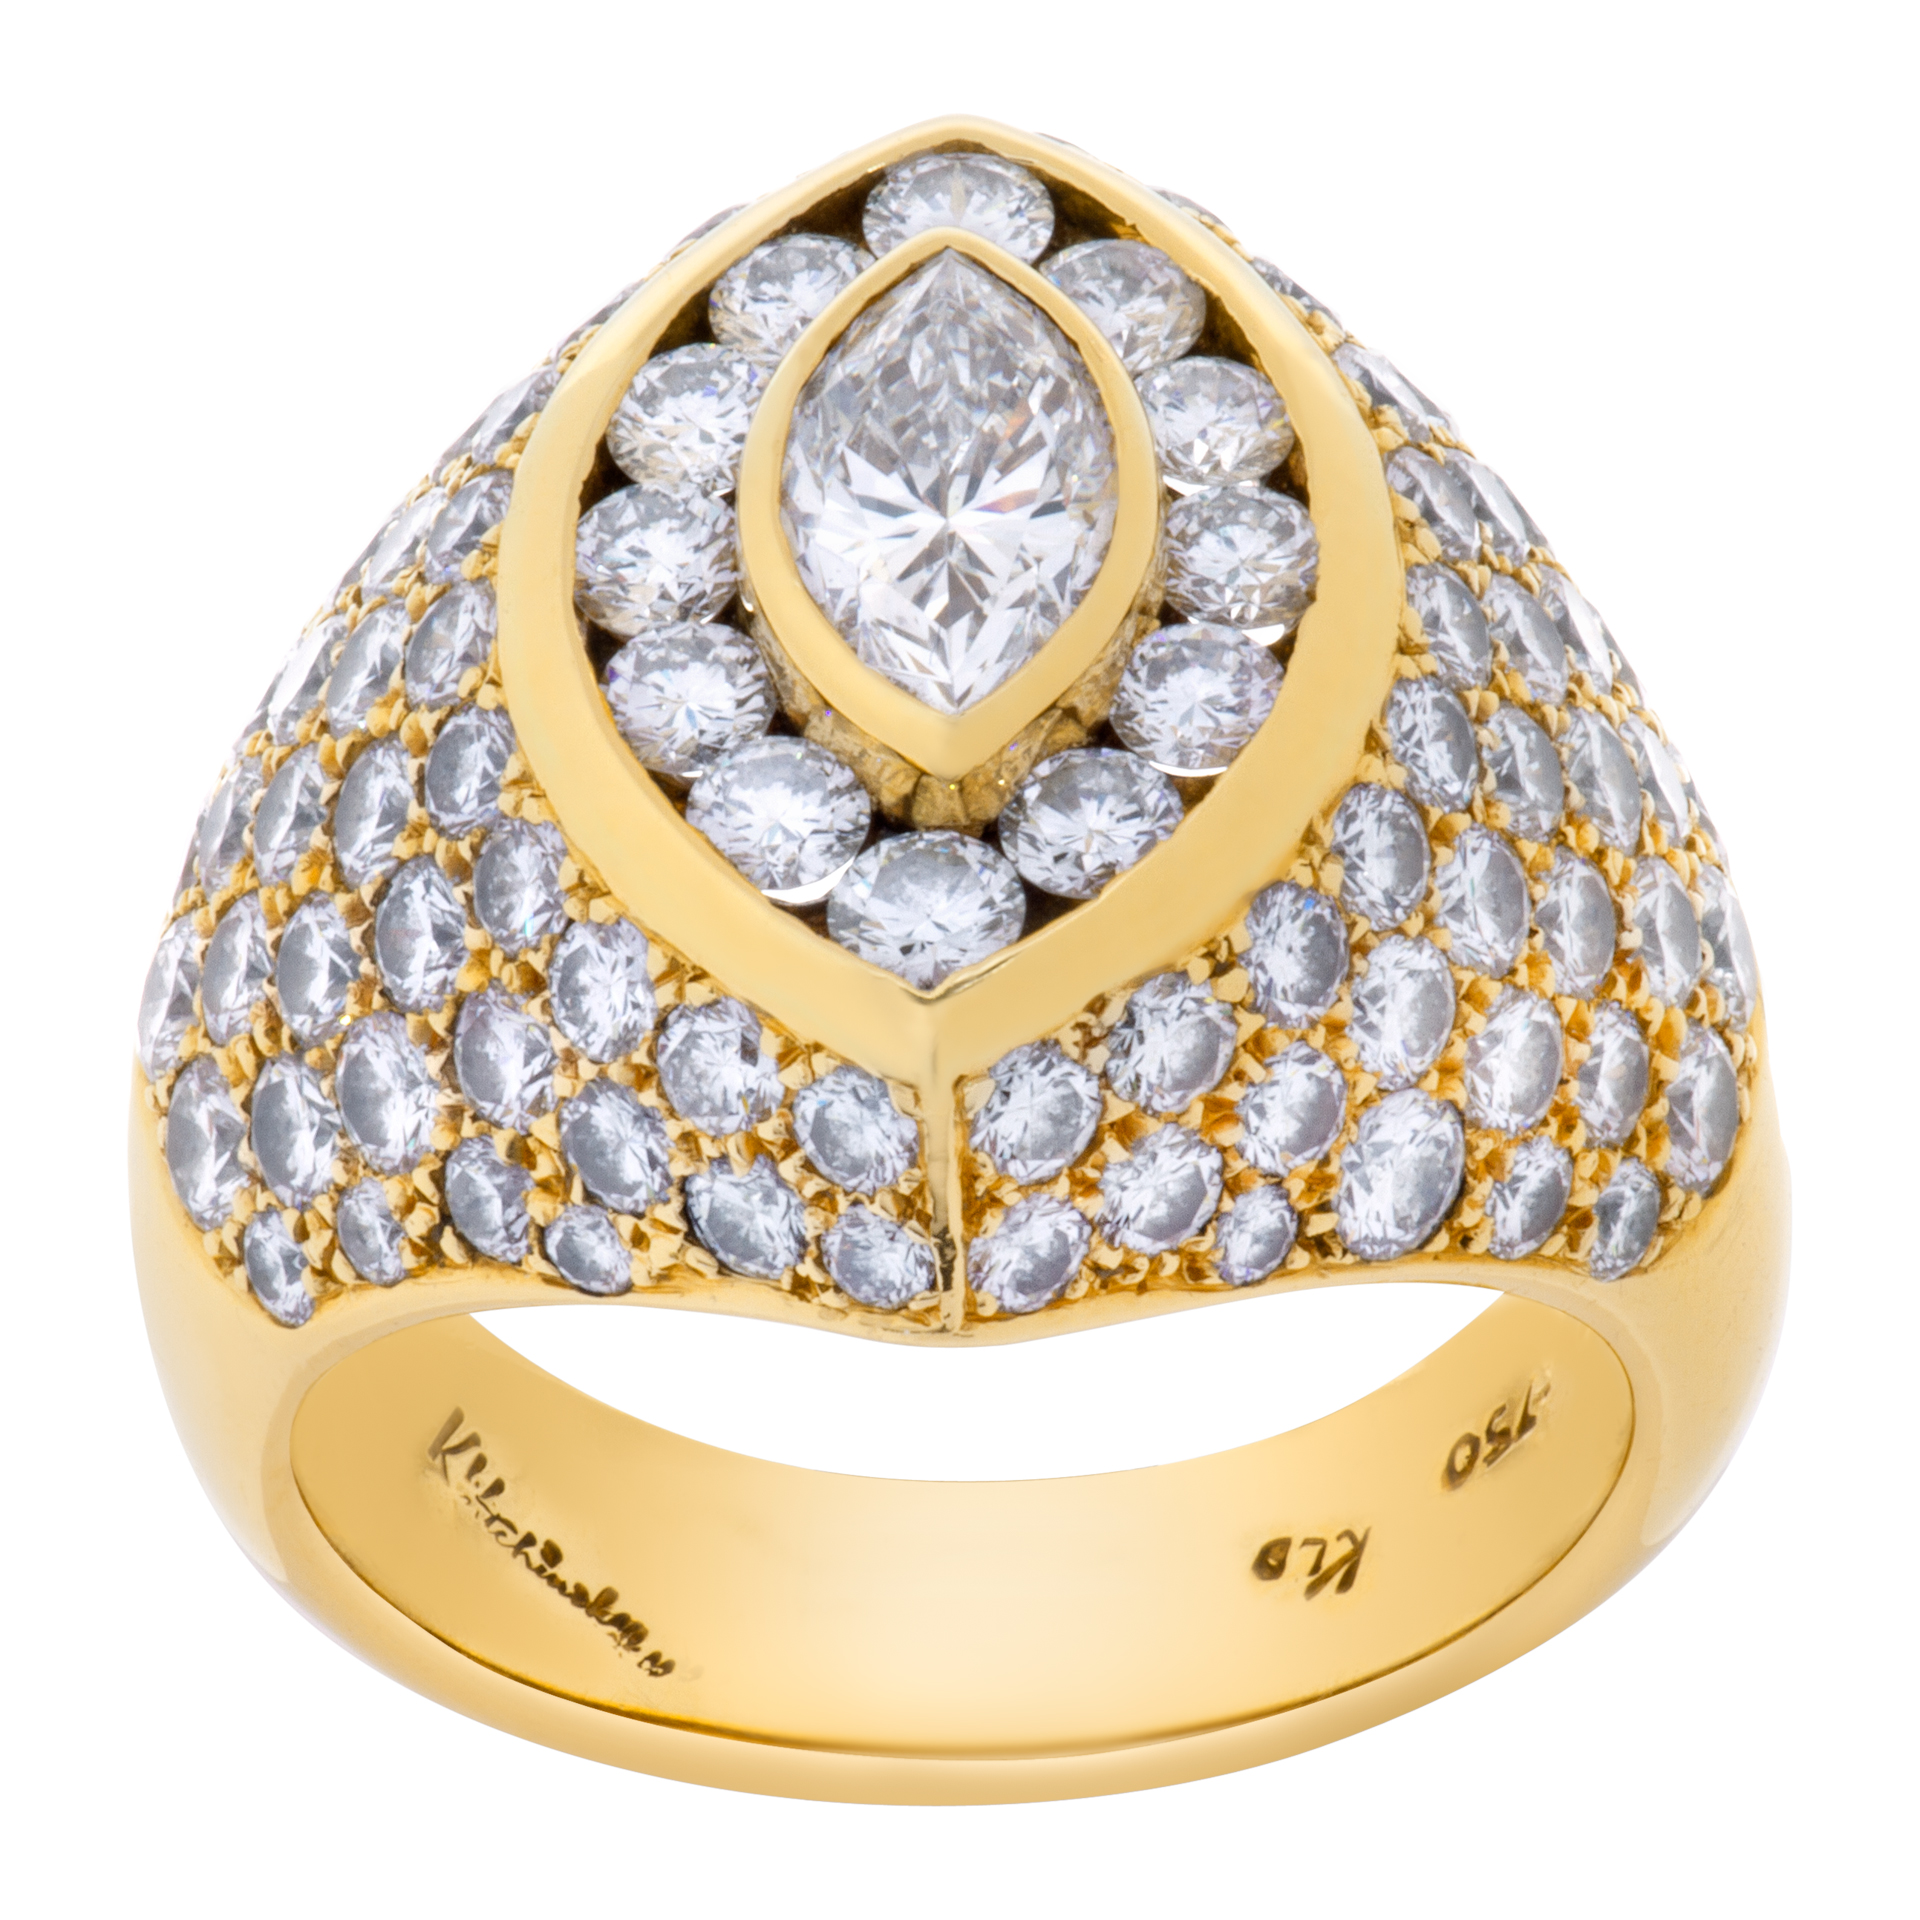 Diamond pave ring in 18K yellow gold. 4 carats in diamonds (E-F color, VVS clarity) image 1